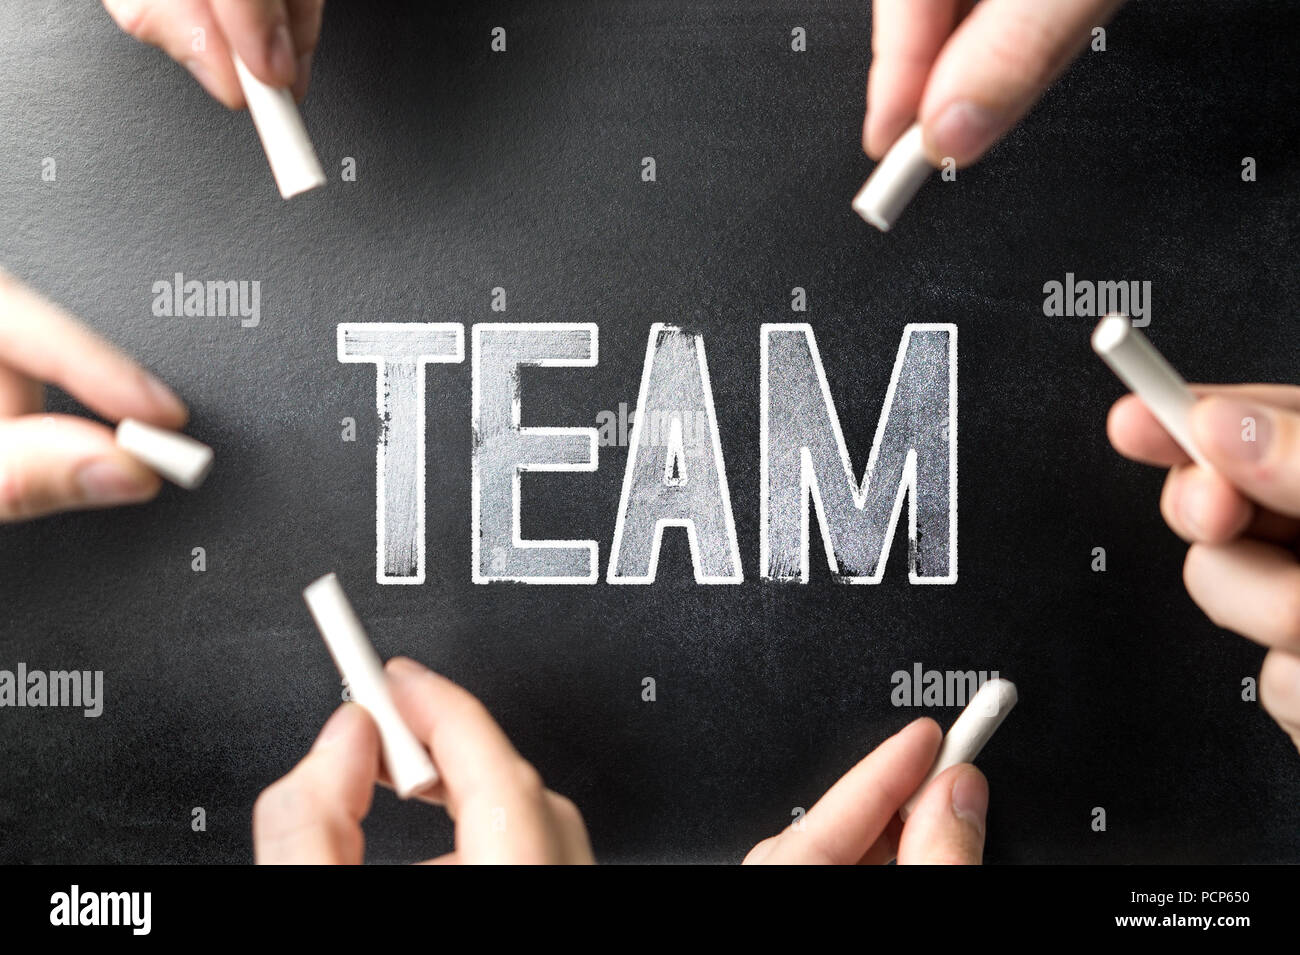 Teamwork and group work concept. Multiple people writing the word team to the same chalkboard with chalk pens. Stock Photo